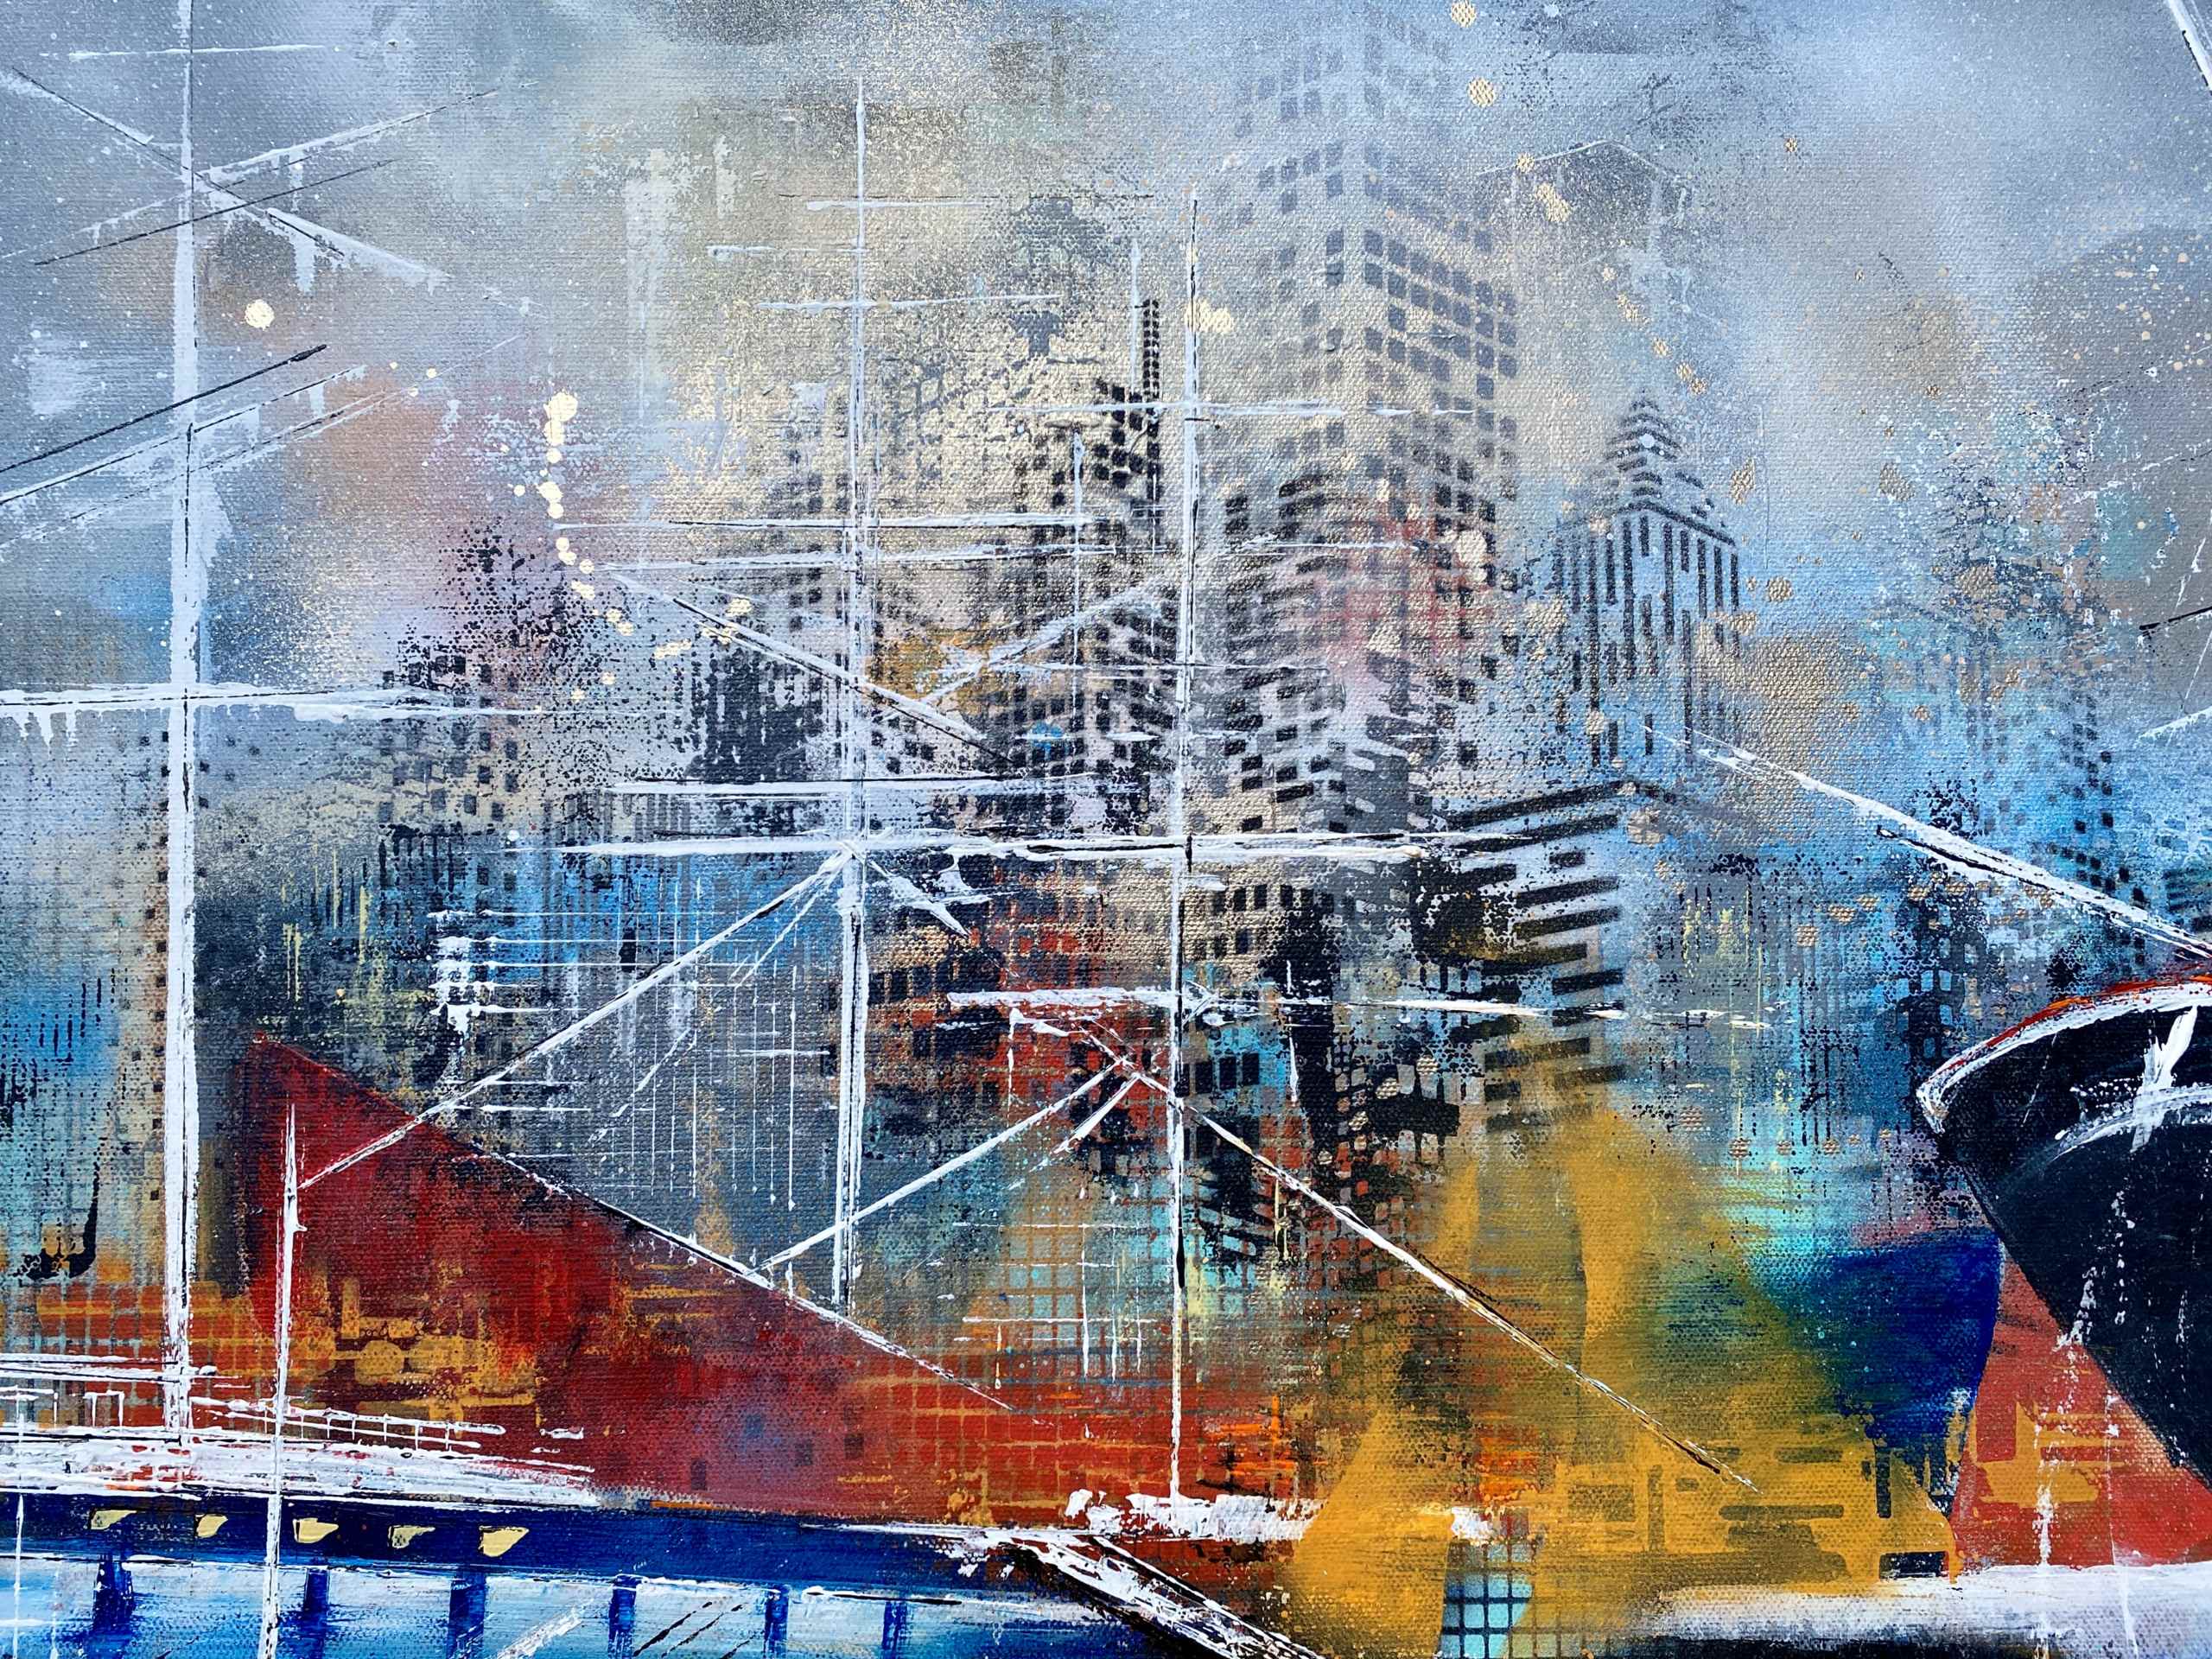 Detail of artwork "South Street Seaport" by Nina Groth